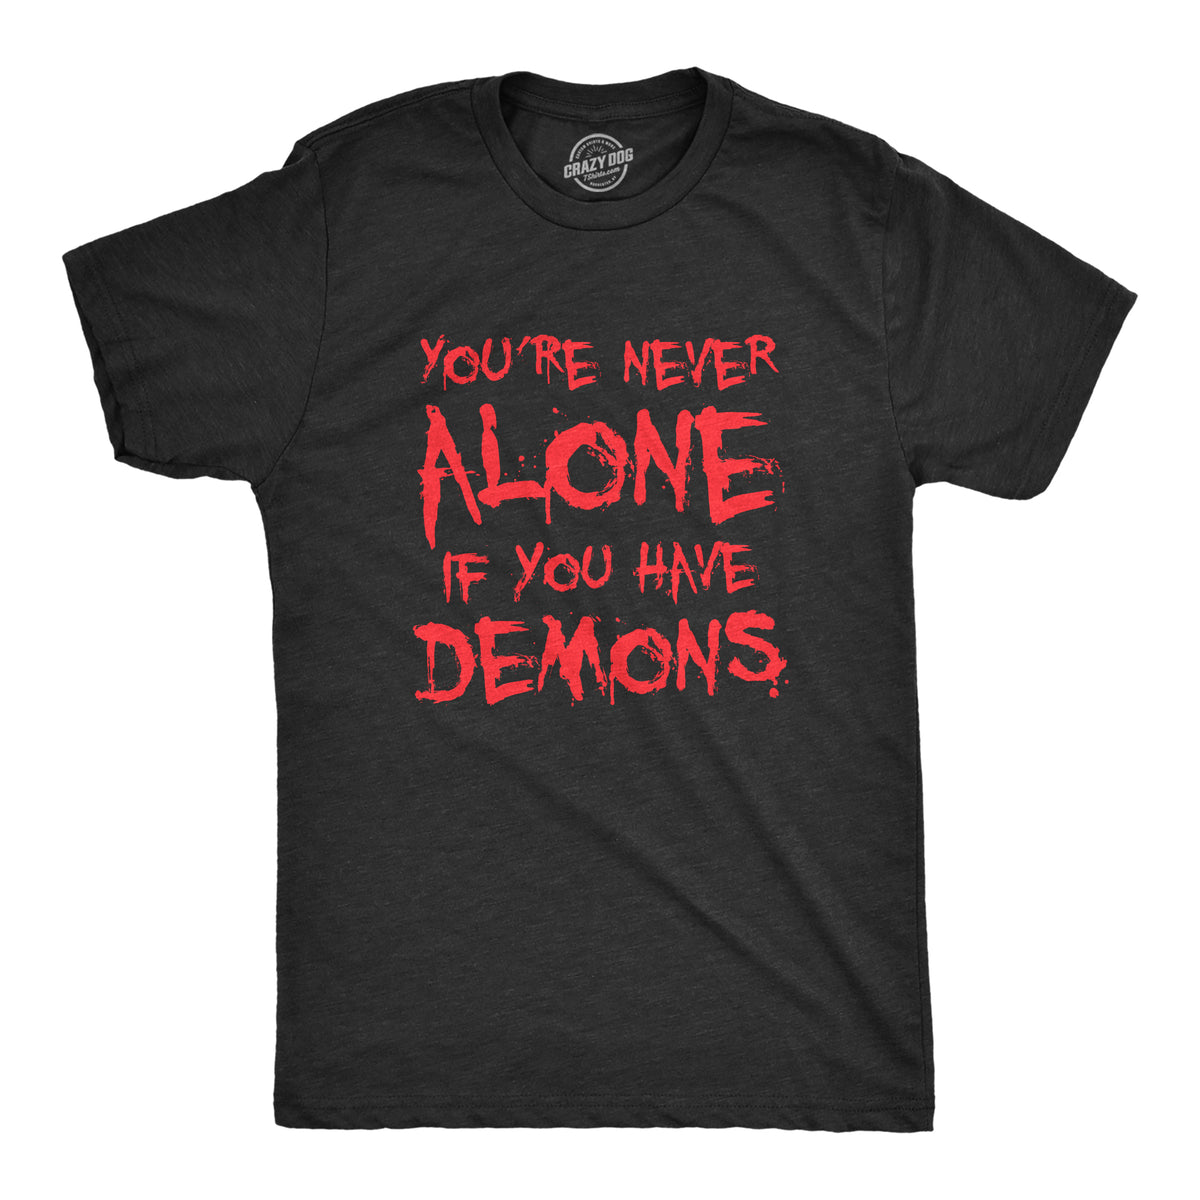 Funny Heather Black - DEMONS Youre Never Alone If You Have Demons Mens T Shirt Nerdy Sarcastic Tee